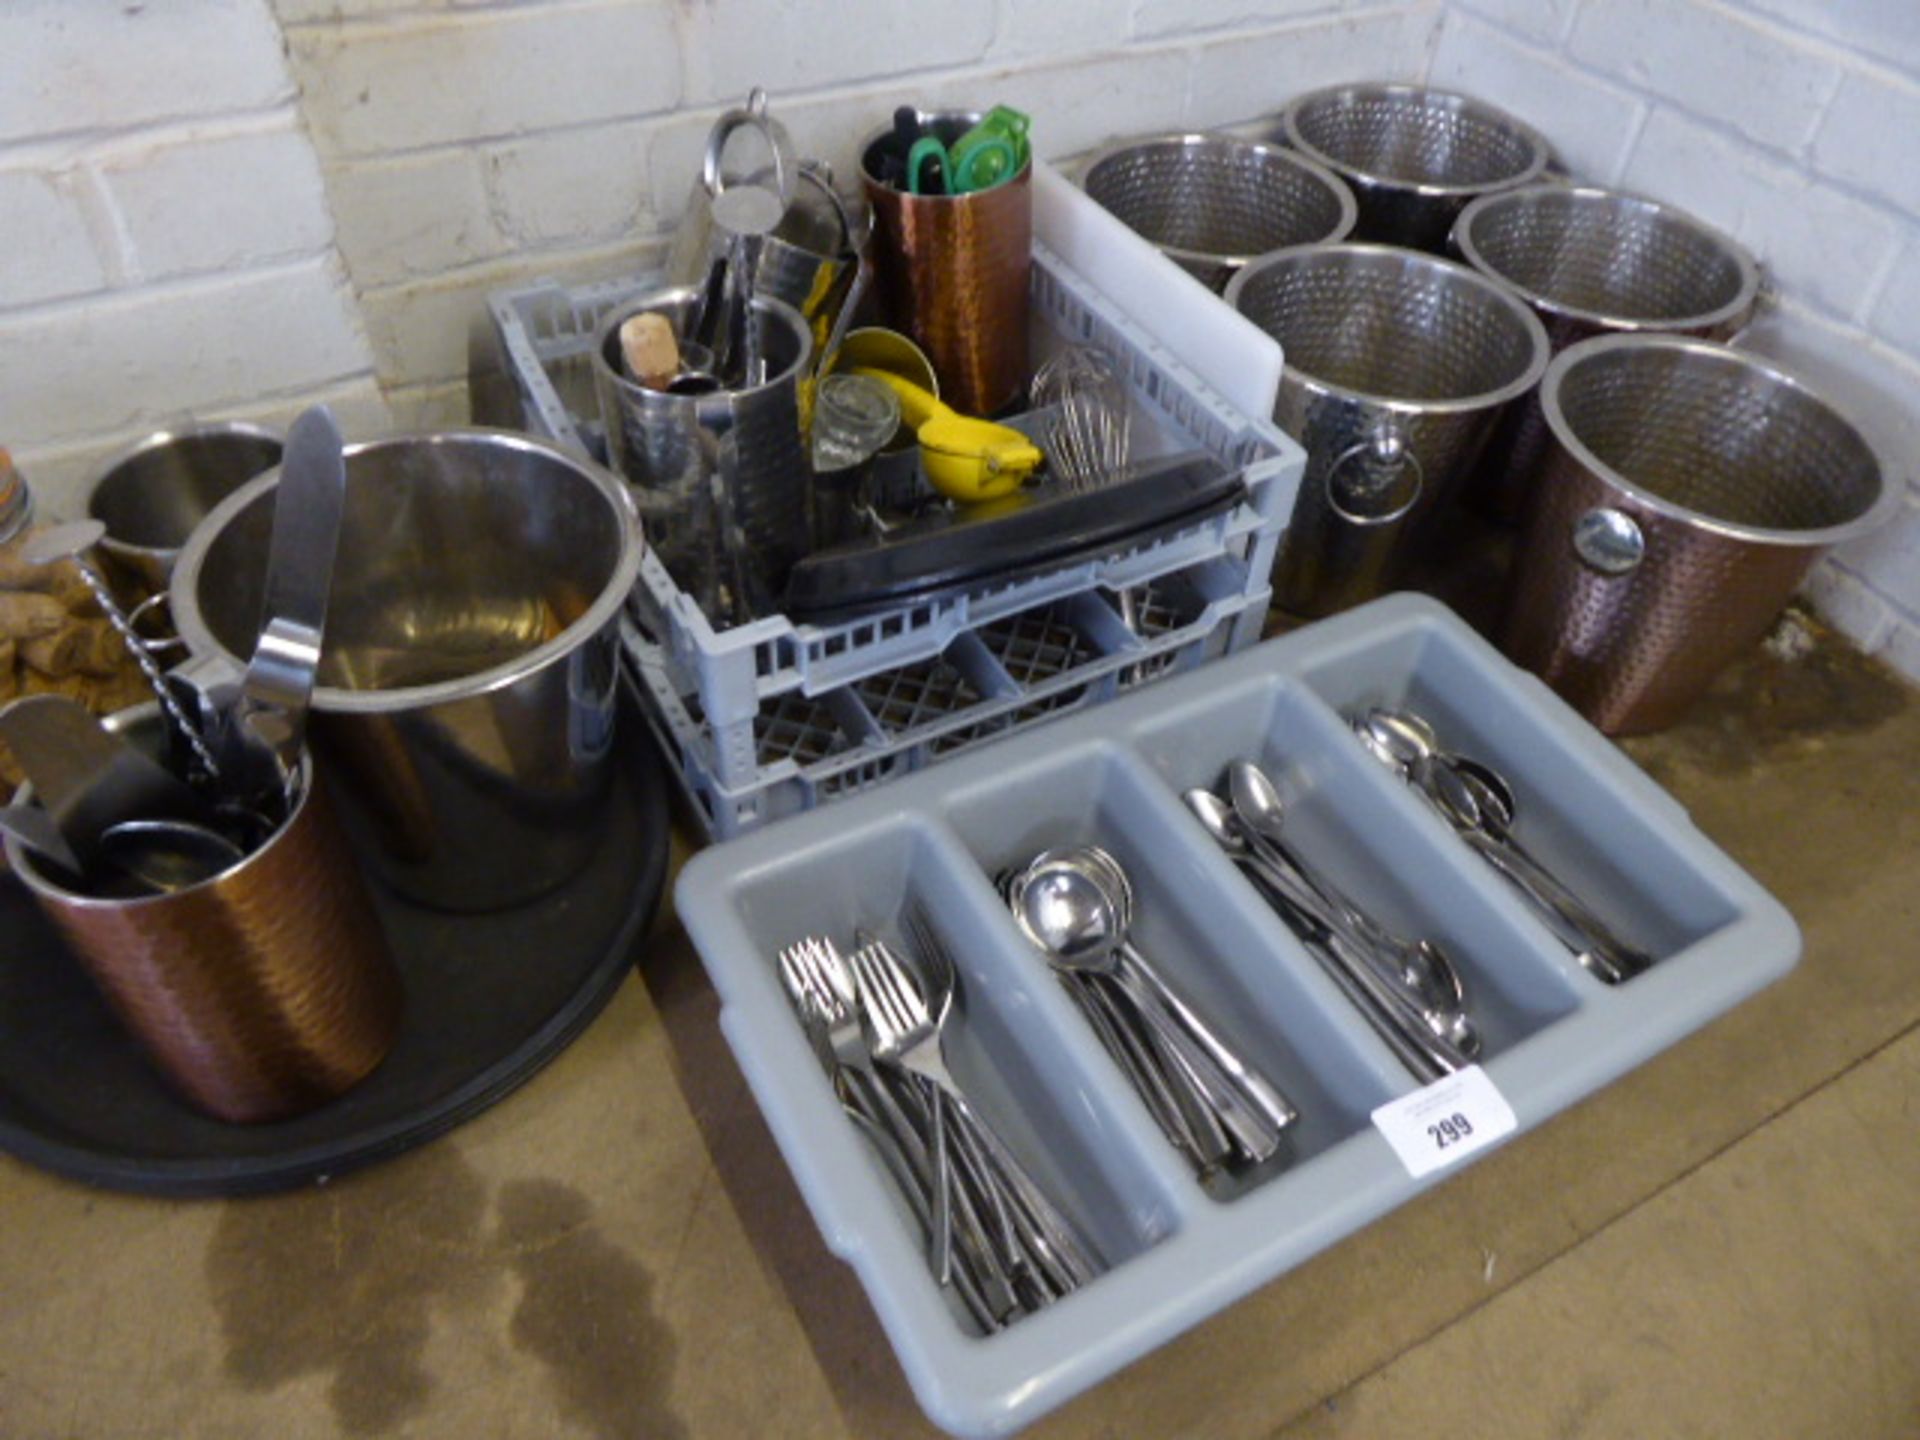 5 champagne buckets, tray of assorted cutlery and 2 trays of bar paraphernalia